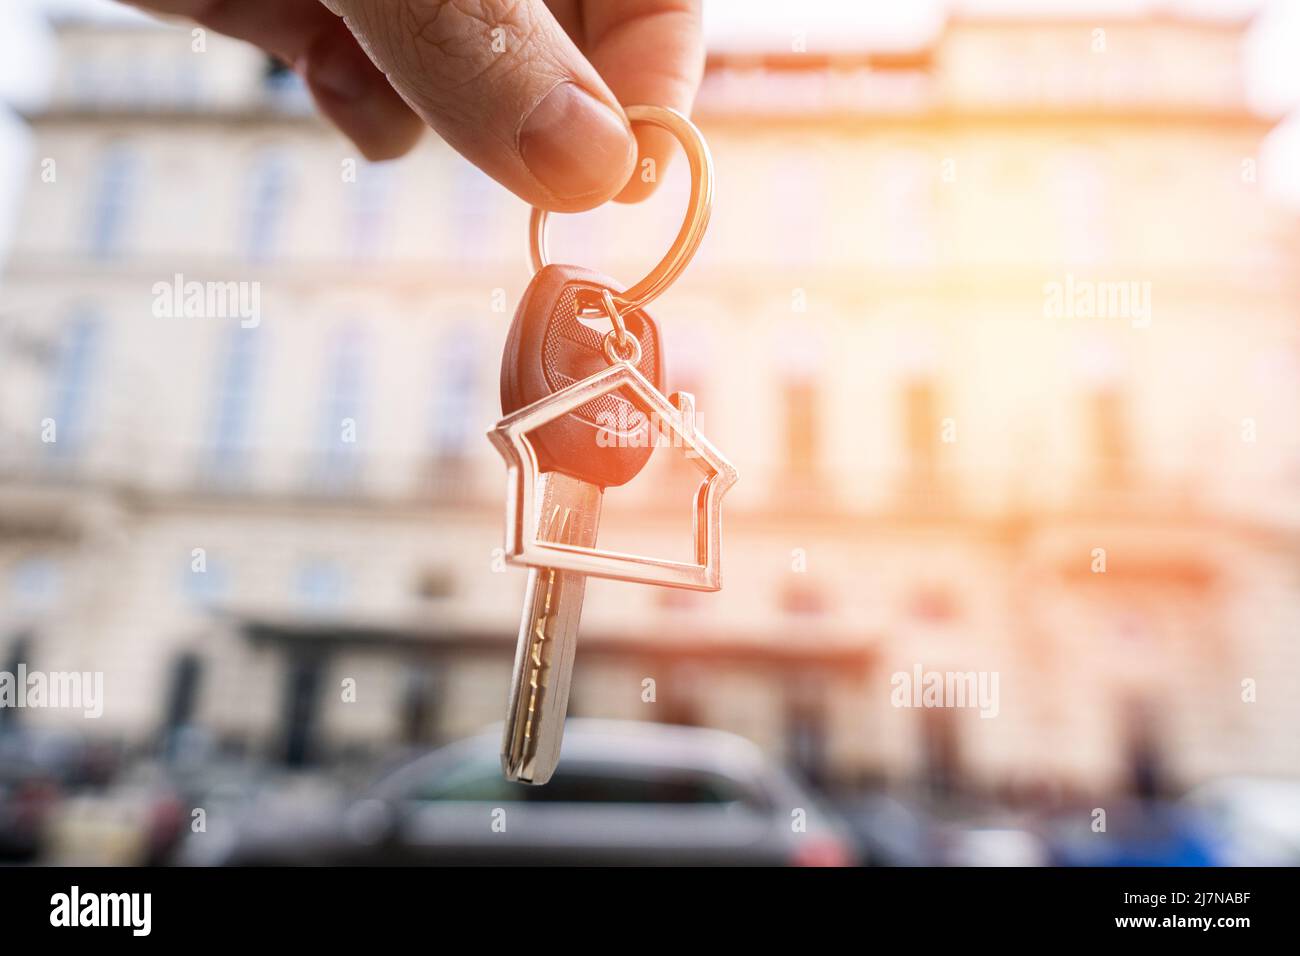 Keychain in the shape of a house with a key in the hands of a person against the backdrop of an expensive fashion house Stock Photo